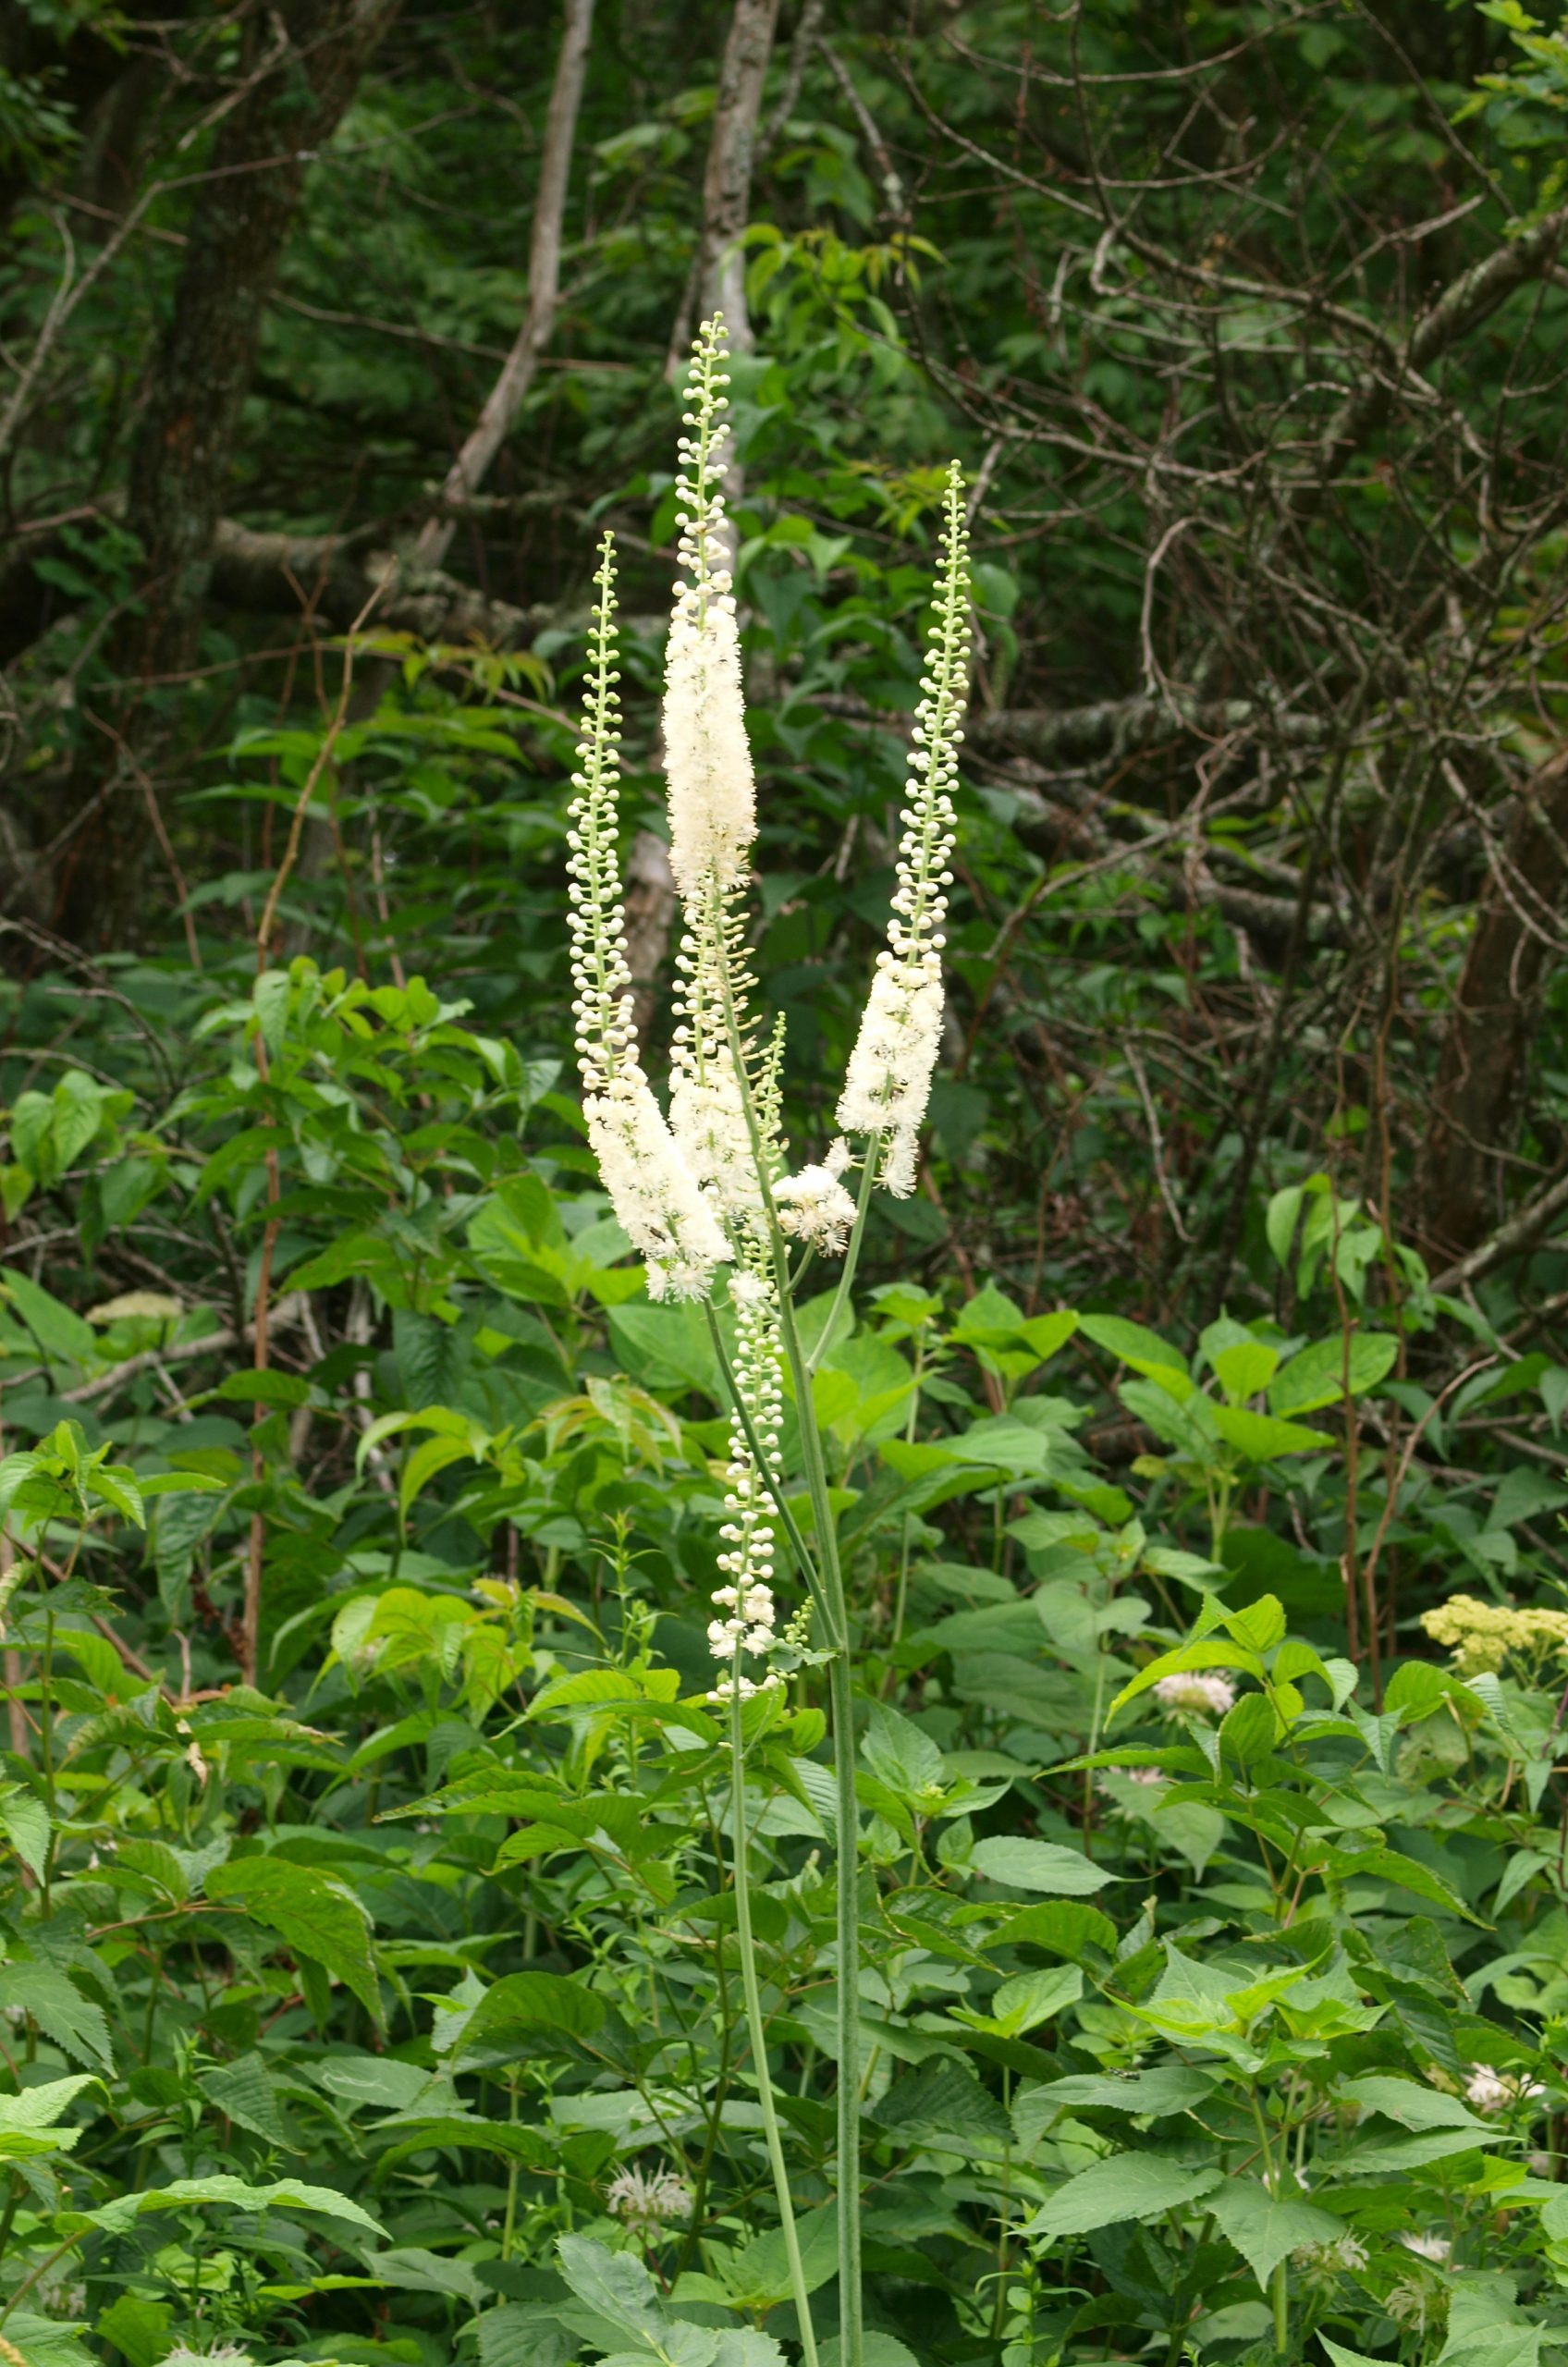 Image of Black cohosh (Actaea racemosa), a member of the buttercup family.